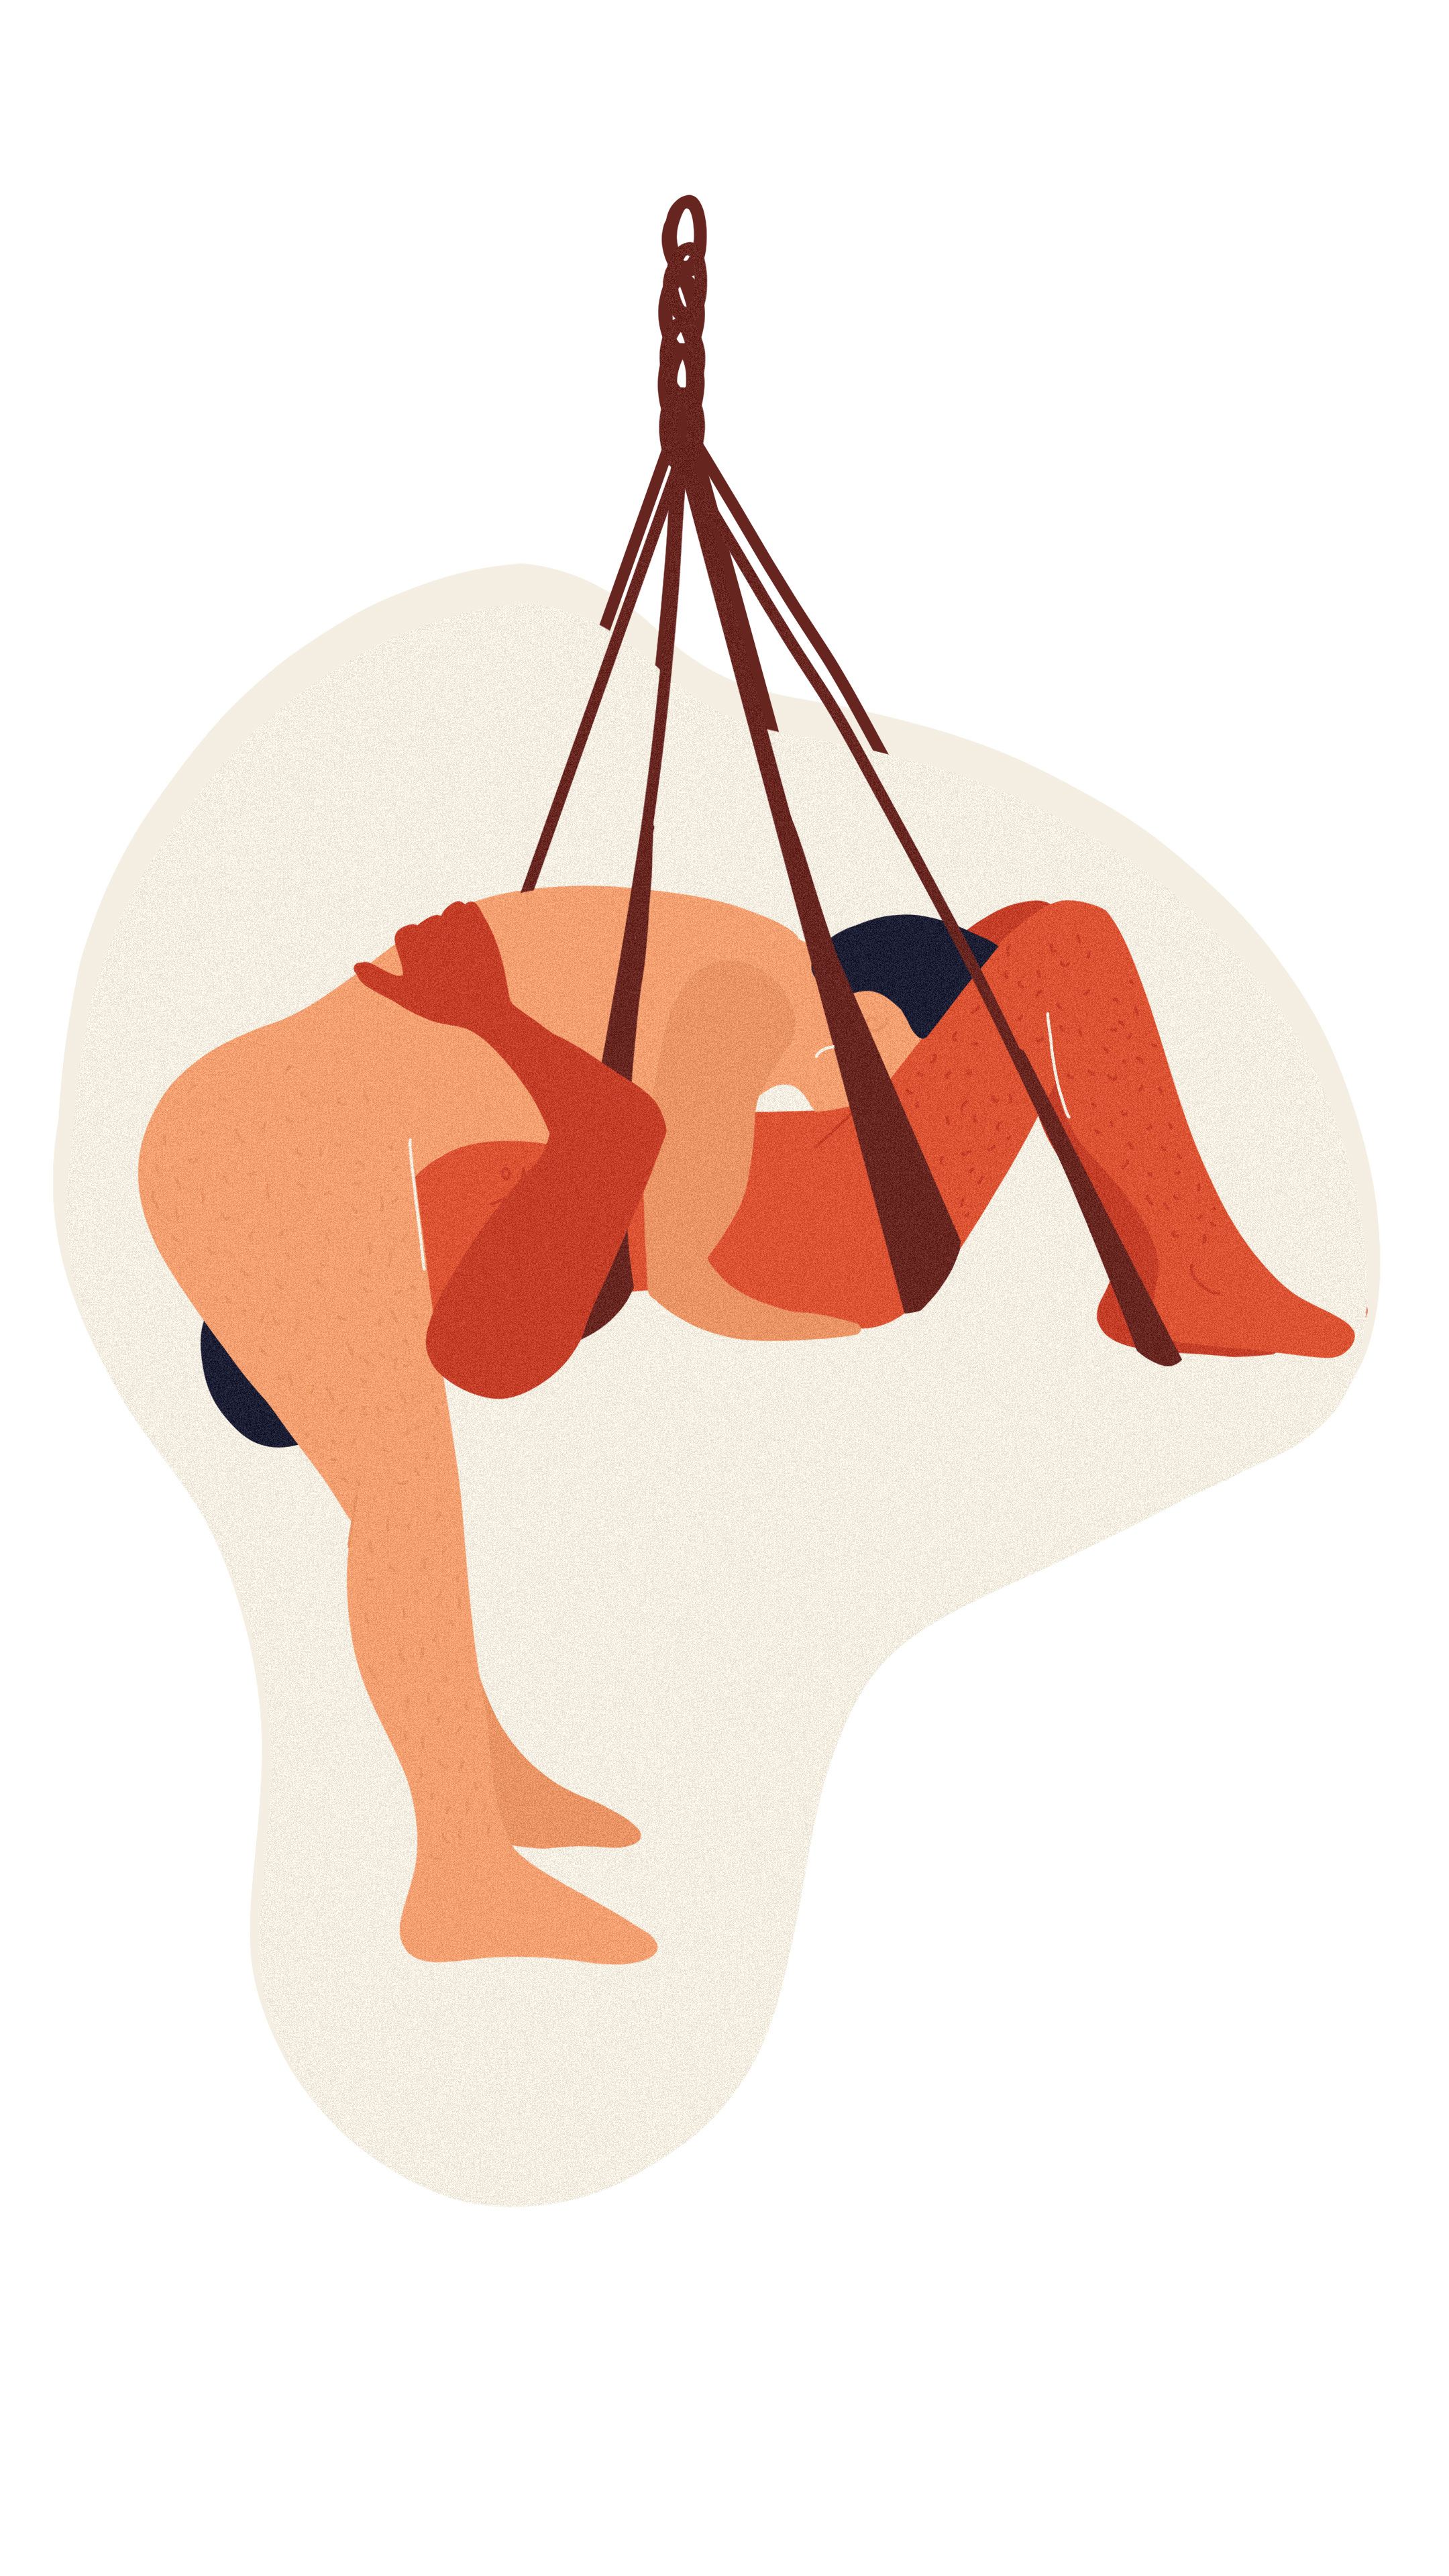 10 Sex Swing Positions picture